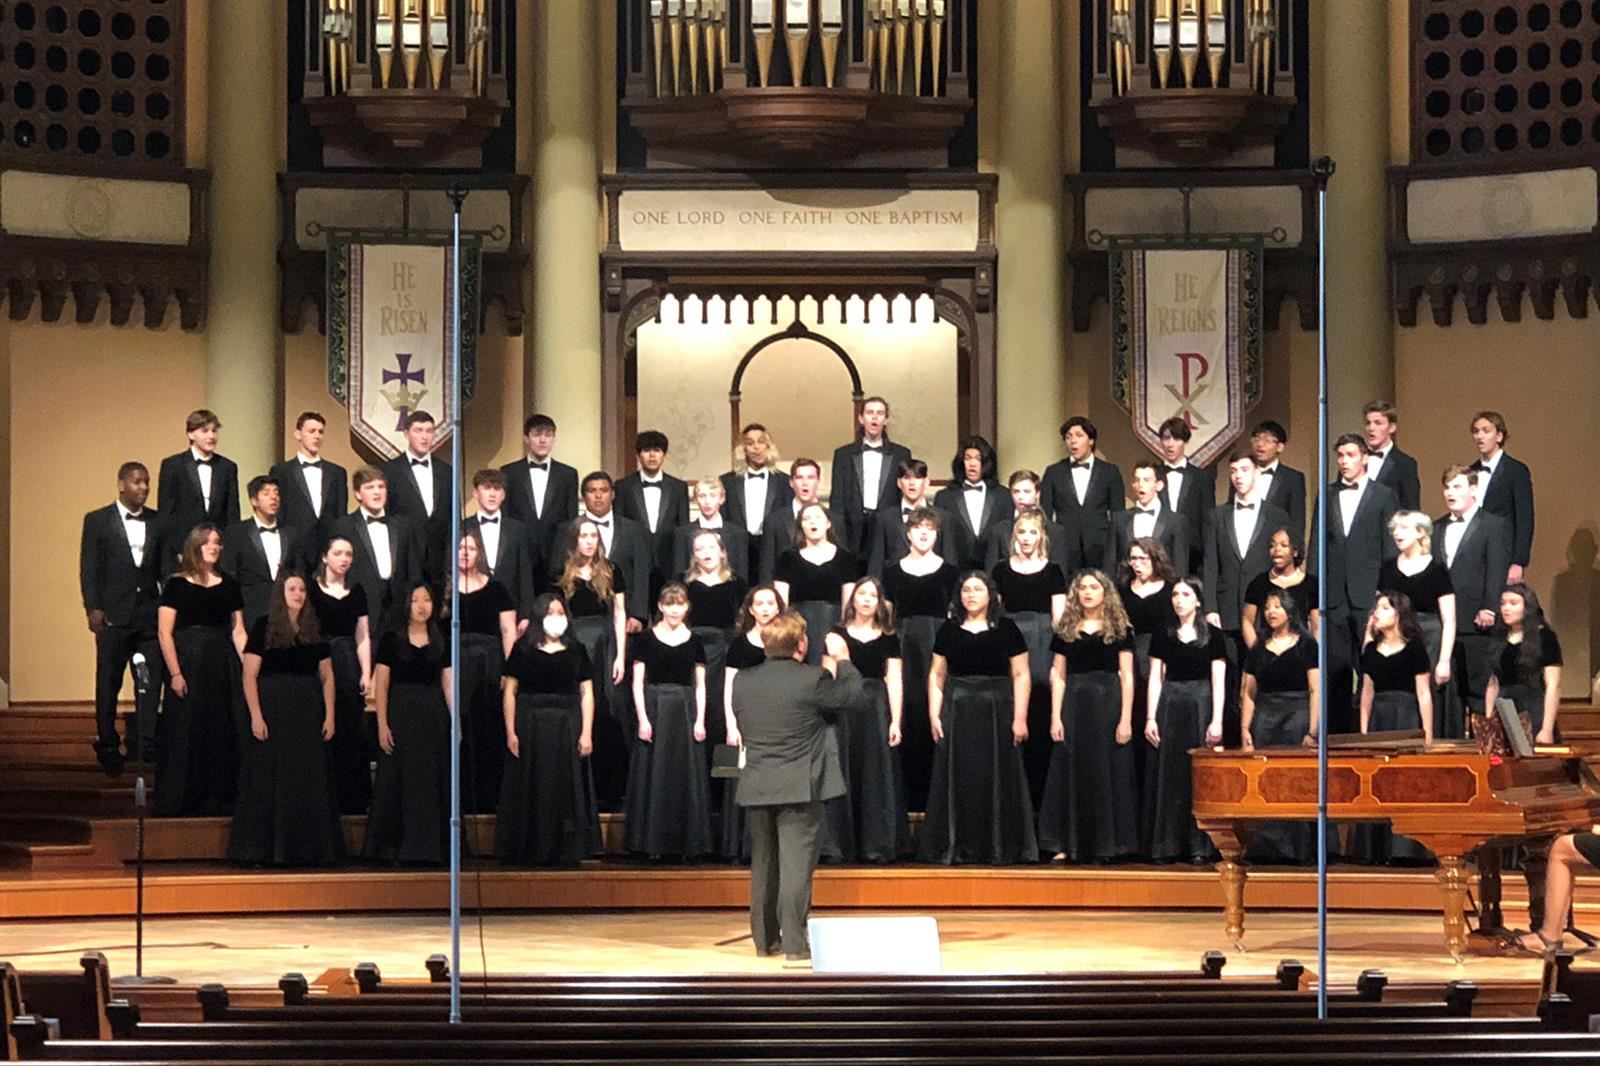 The Bridgeland chorale, directed by Christopher Fiorini, was named a National Winner in the Mark of Excellence awards.